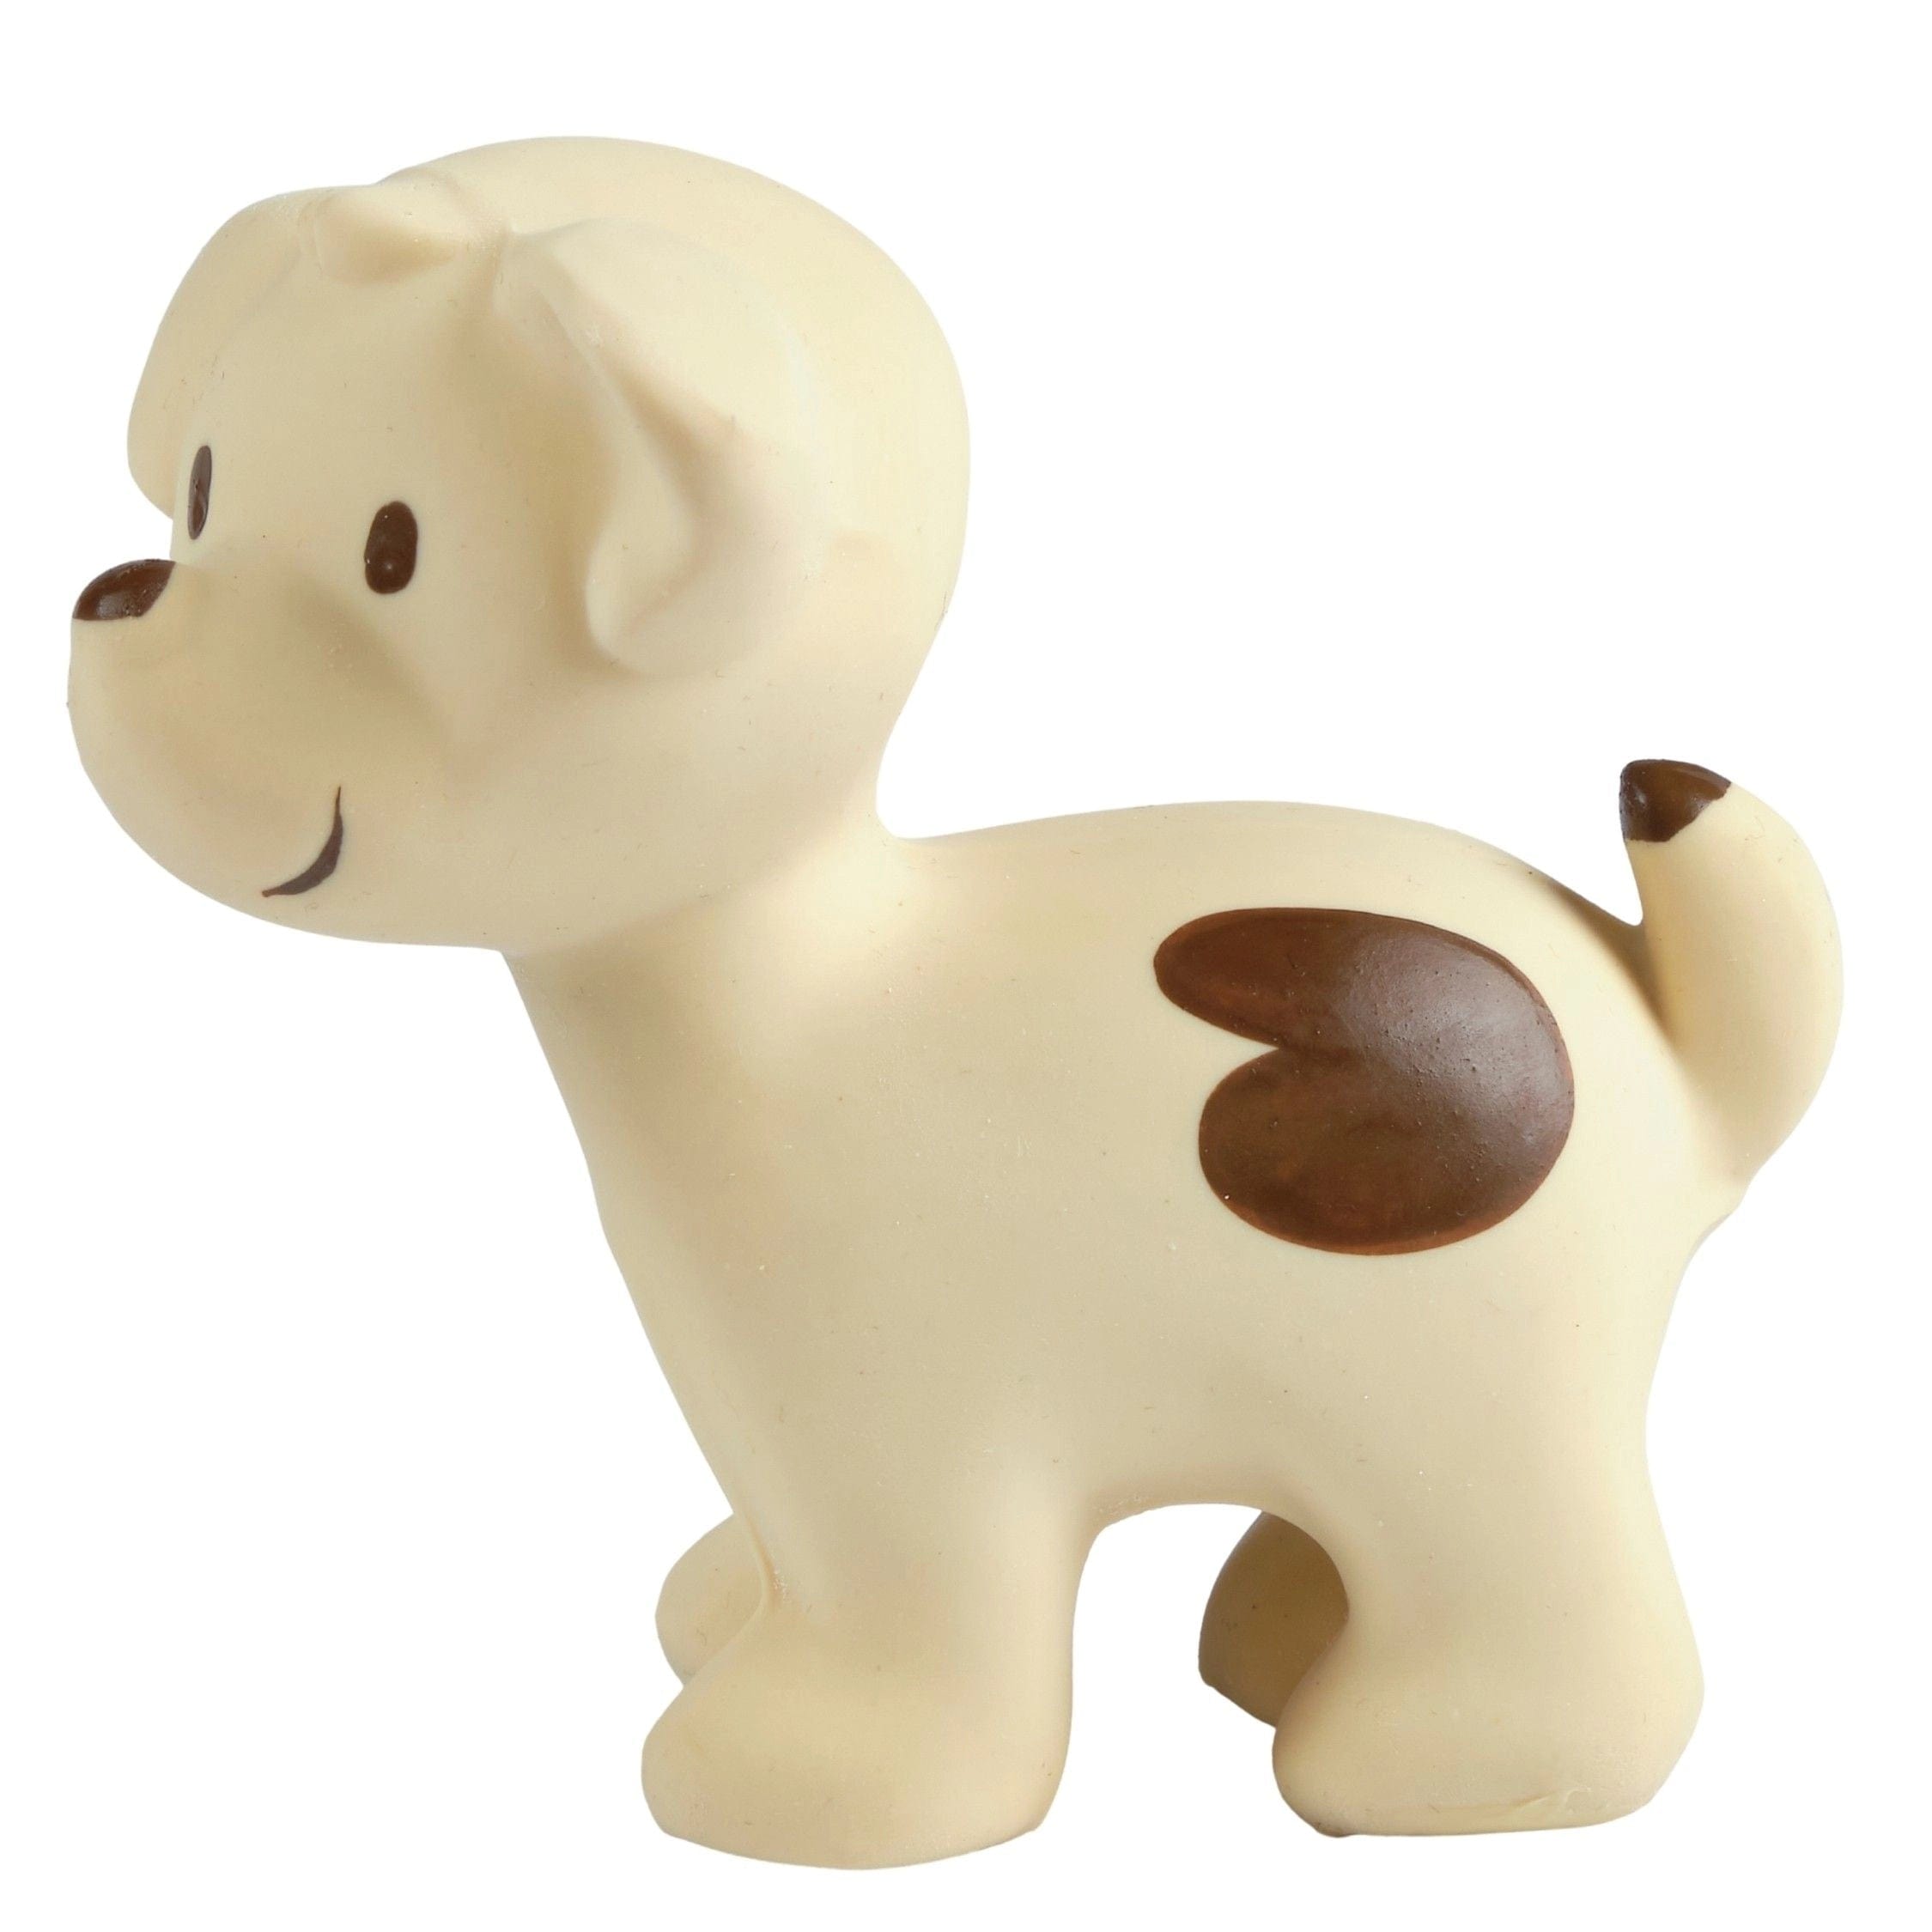 Puppy - Natural Rubber Rattle, Teether & Bath Toy